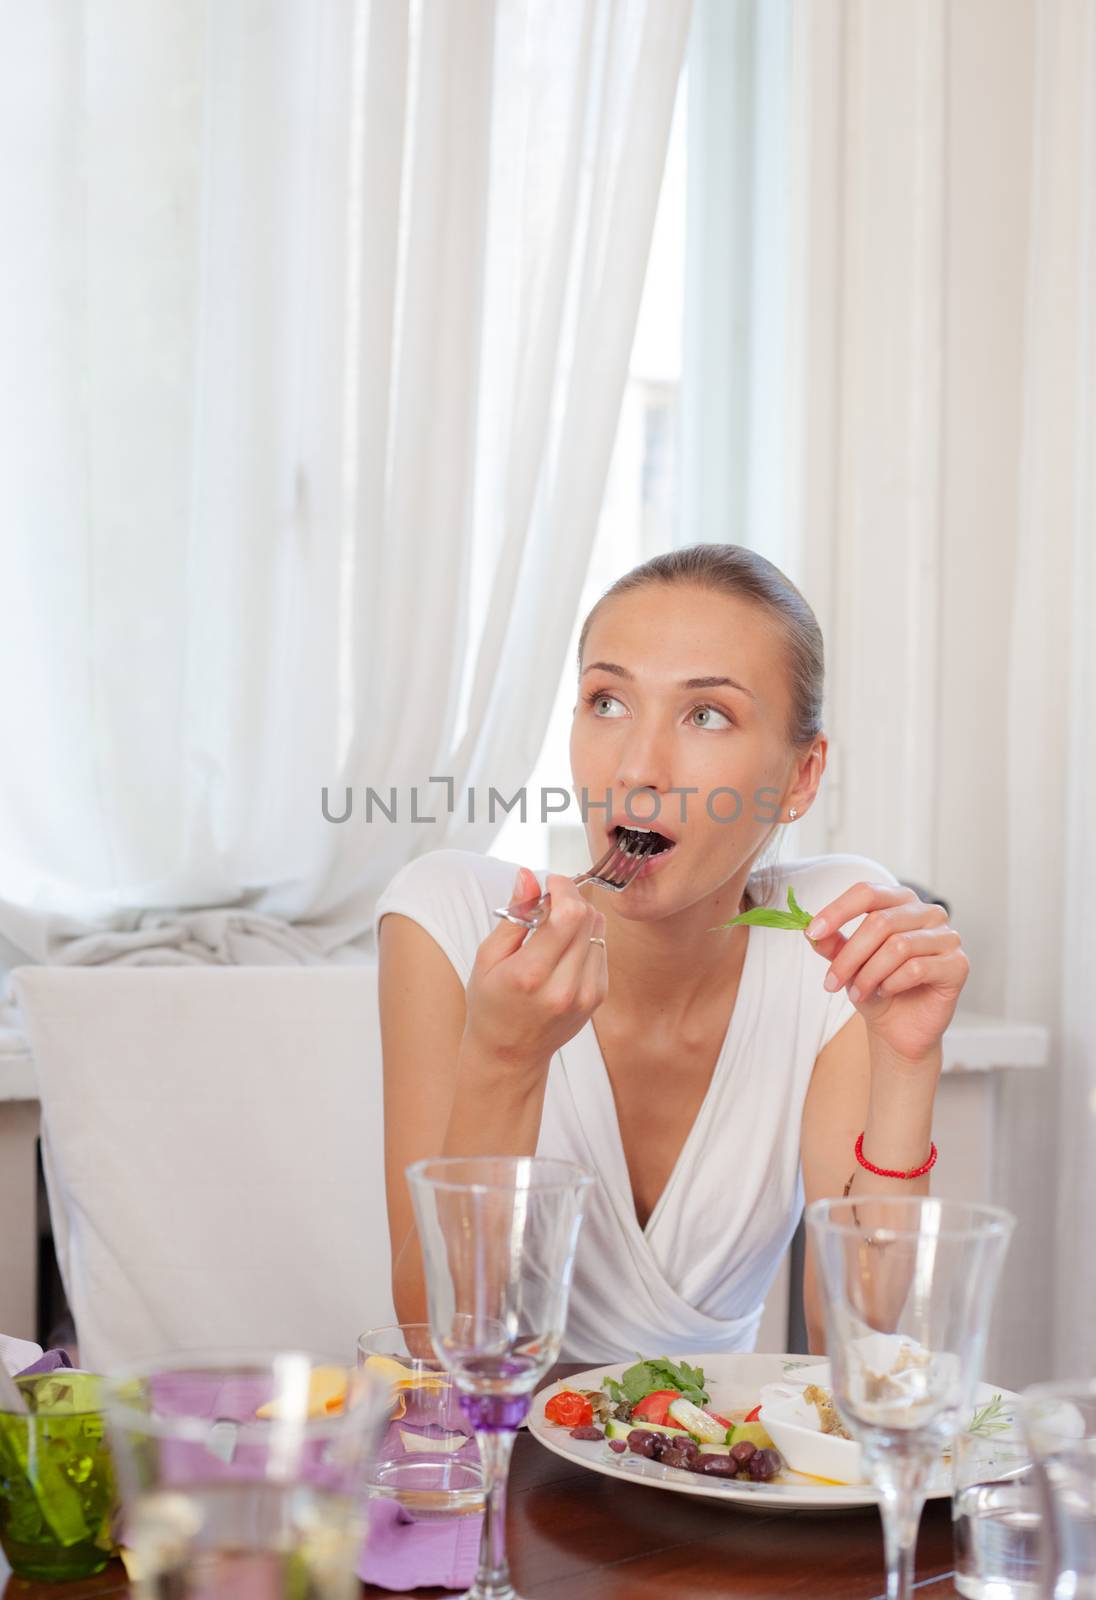 A young beautiful woman is eating in a restaurant.